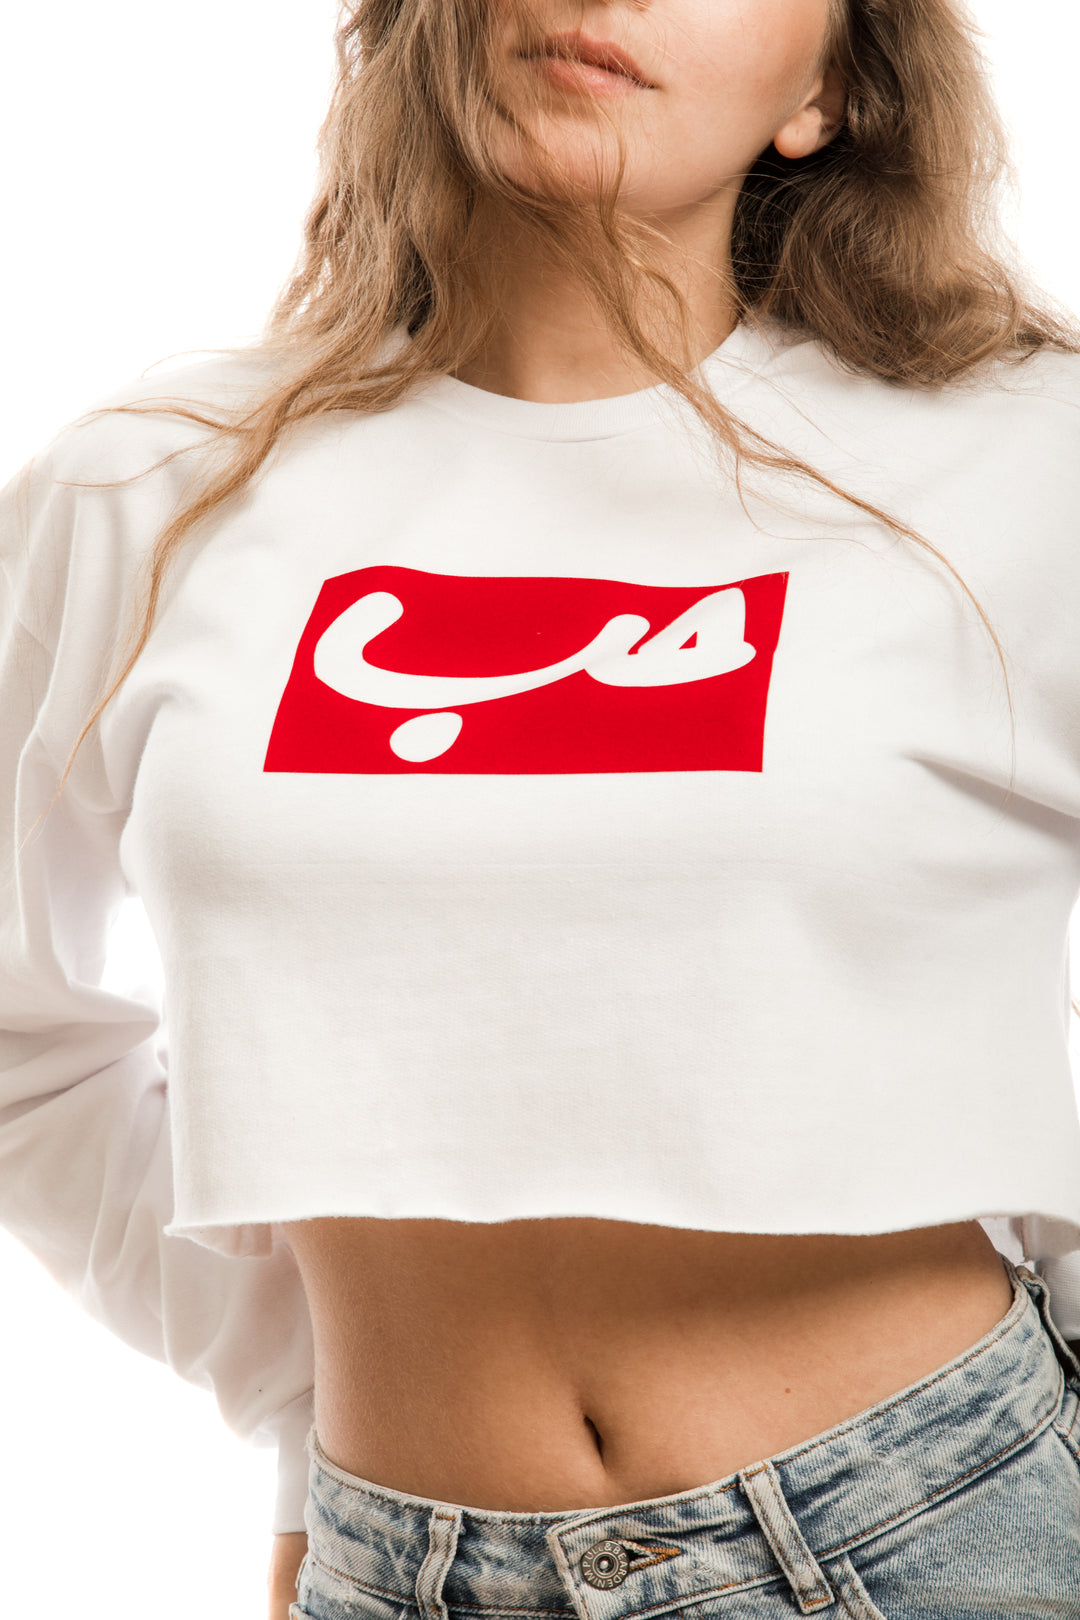 Young adult female wearing white Crop Sweater with Hobb written in Arabic حب in white and printed in a red velvet frame in the center of the Crop Sweater.